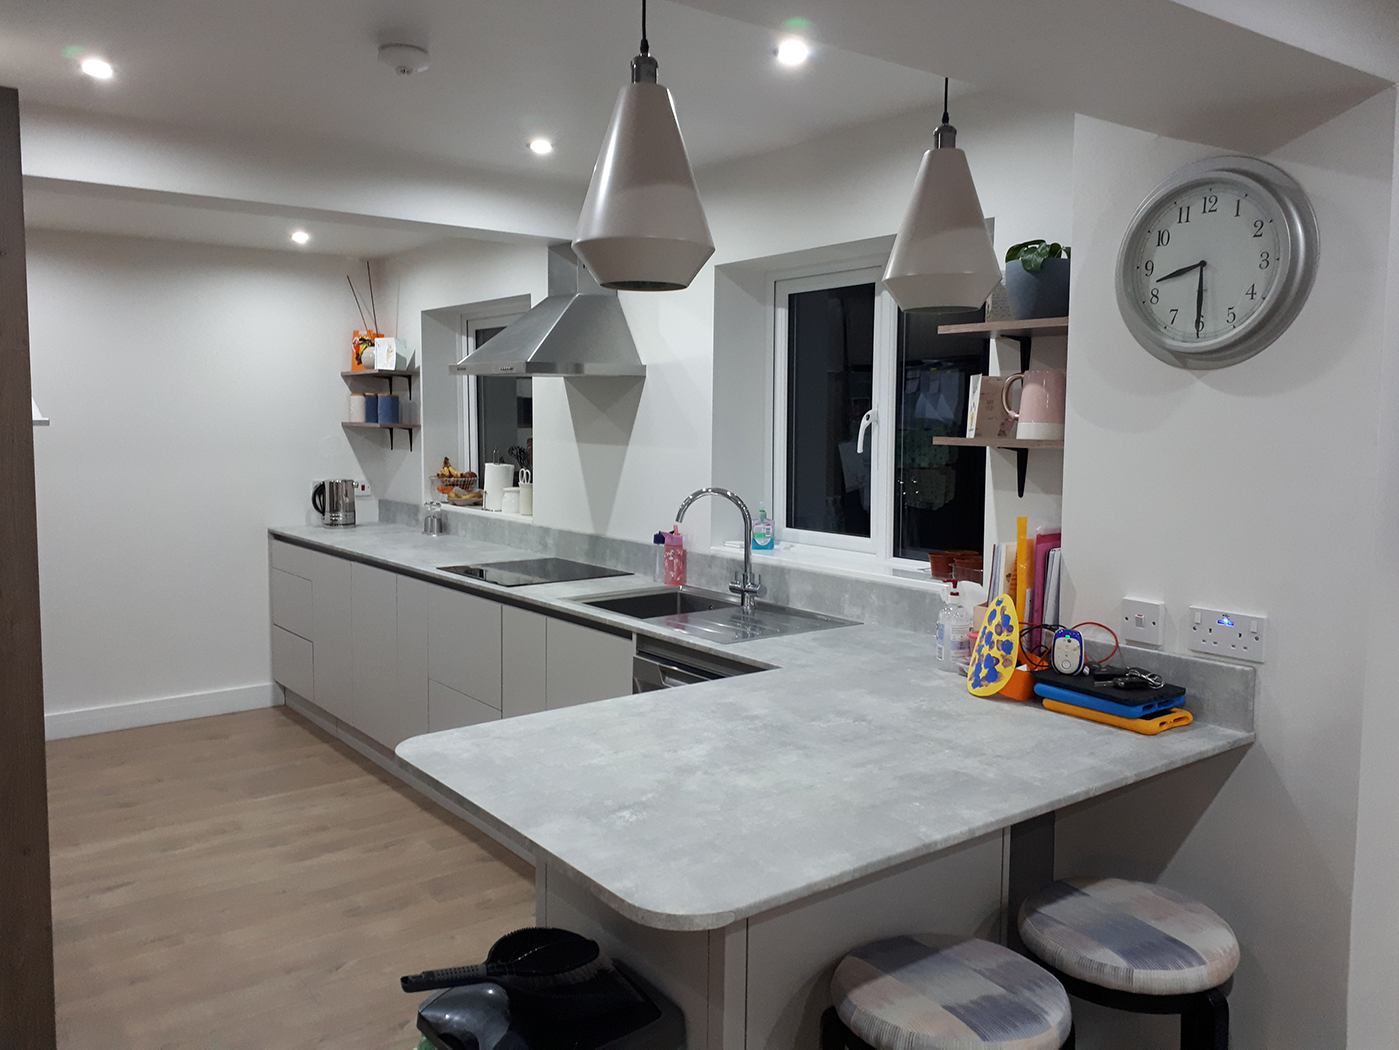 A kitchen with white walls, white cupboards and grey countertops